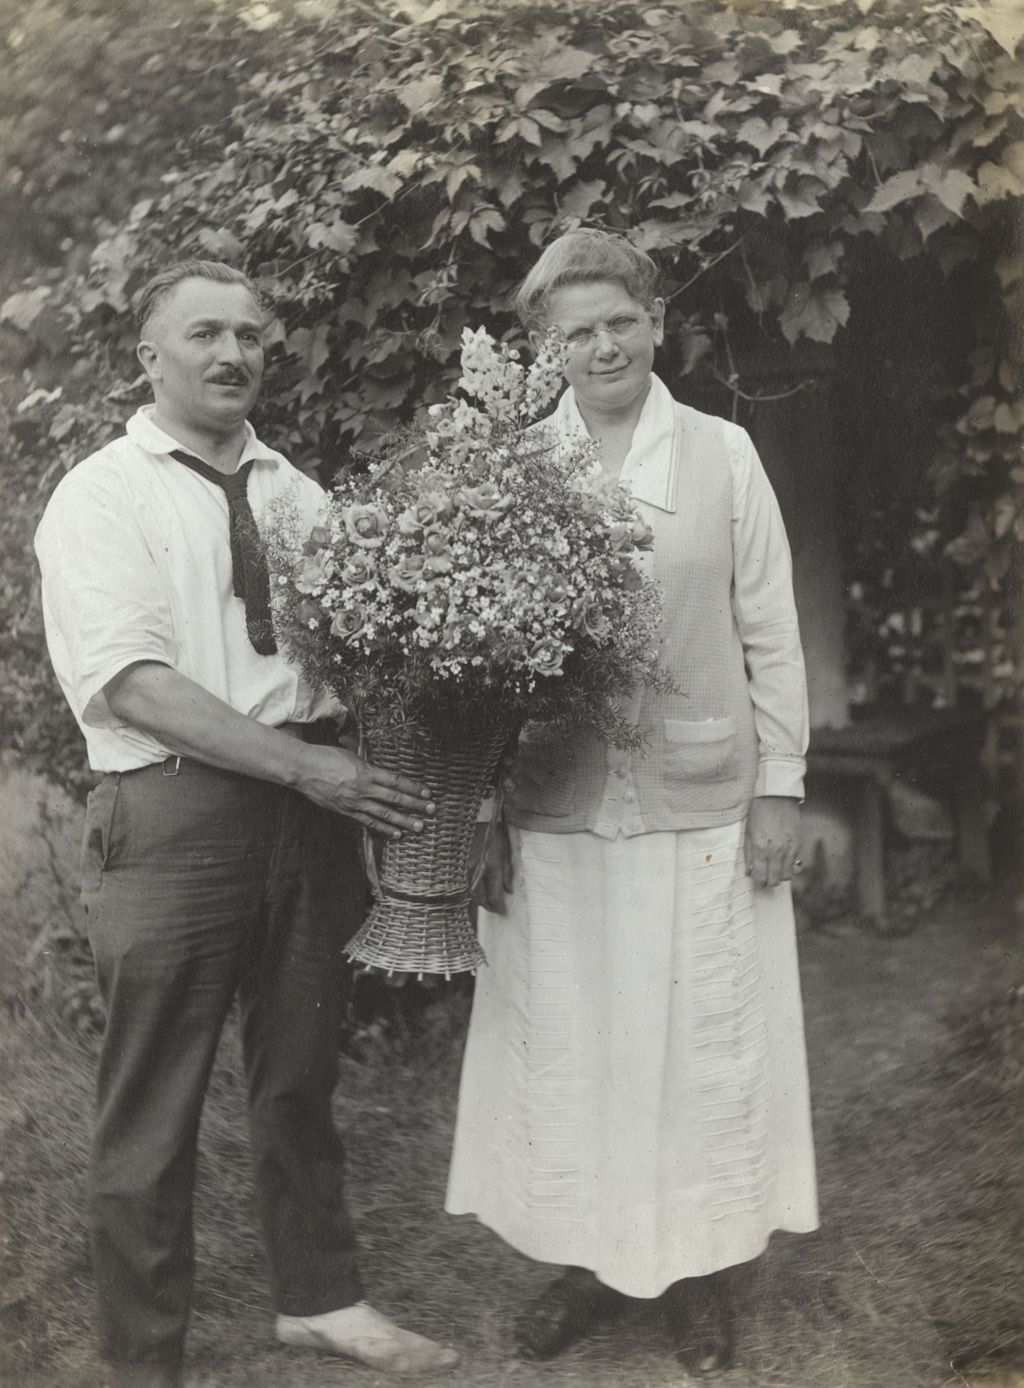 Miniature of James Sylvester and Thora Lund with a basket of flowers from the Hull-House Boys Band